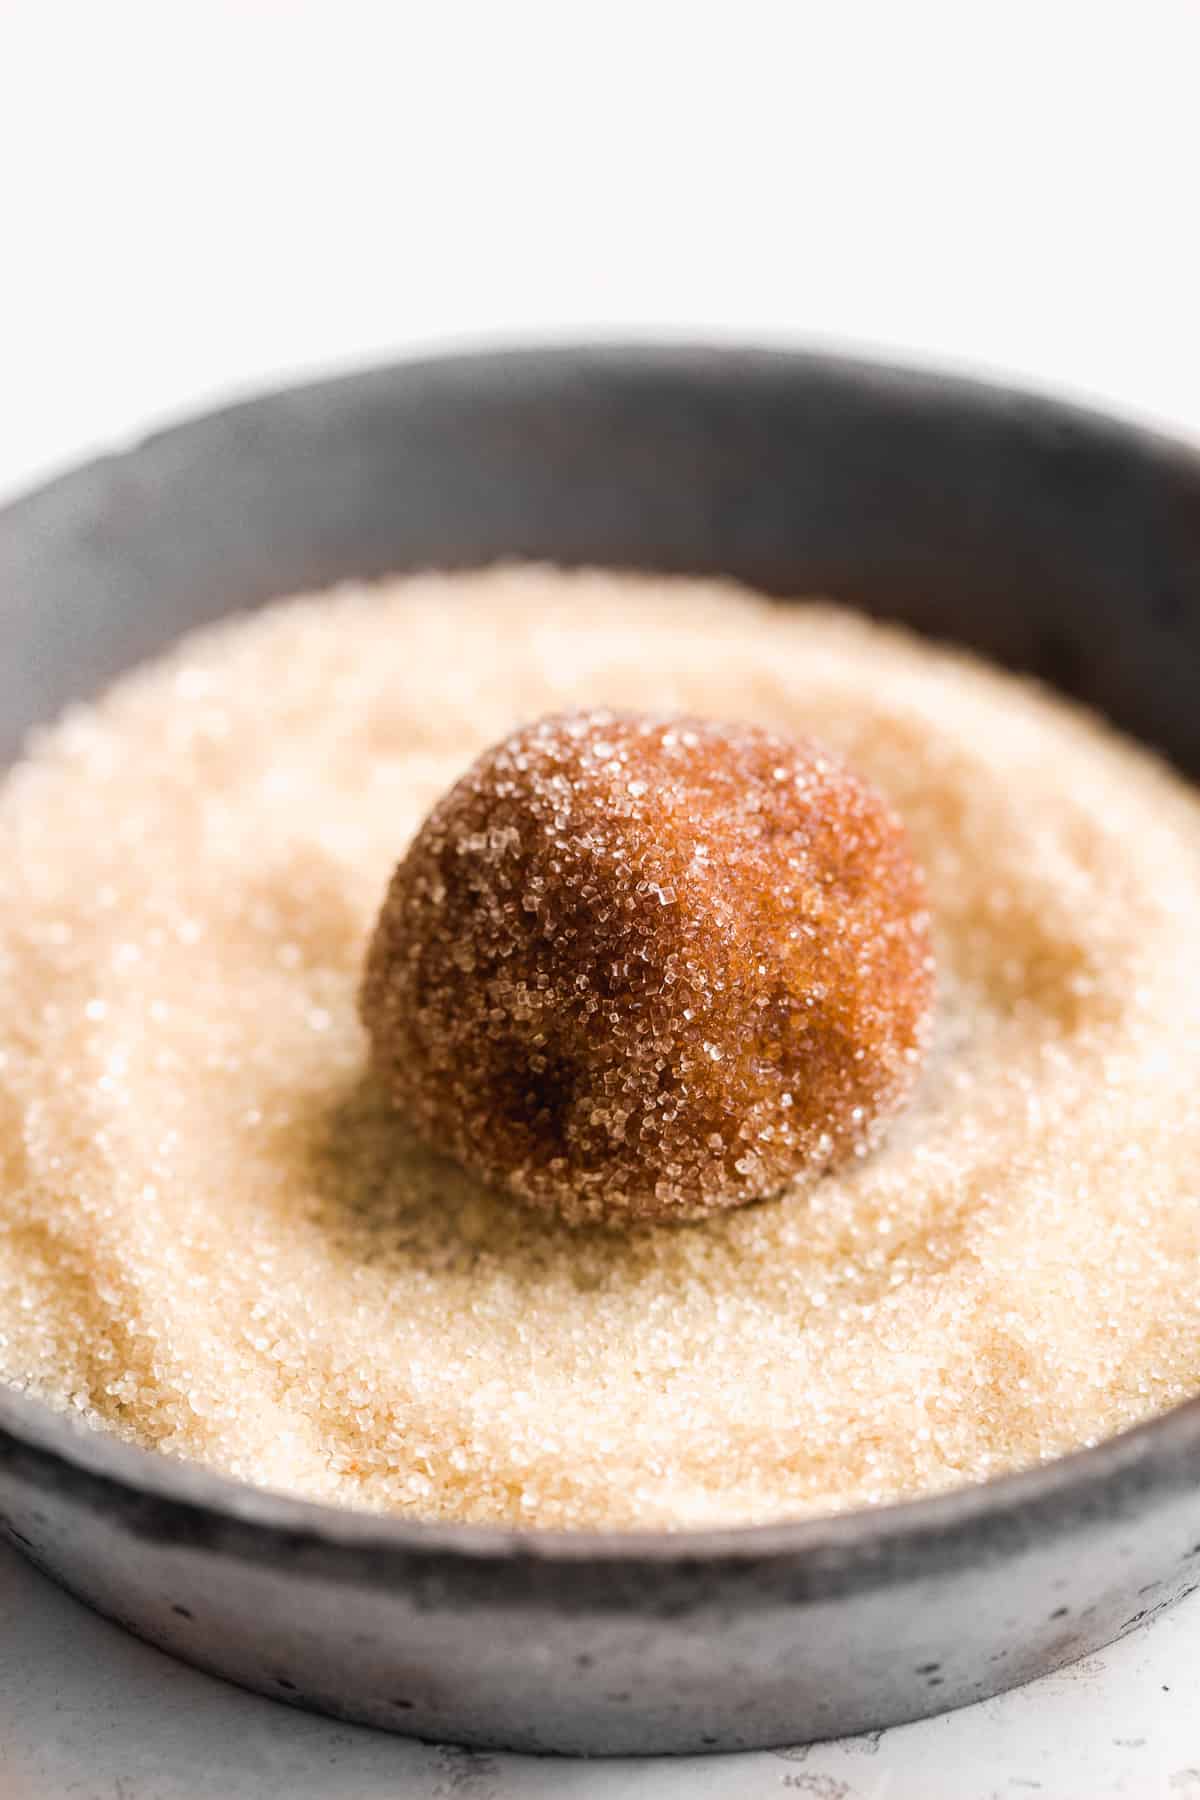 Ball of cookie dough rolled in a dish with corse sugar.